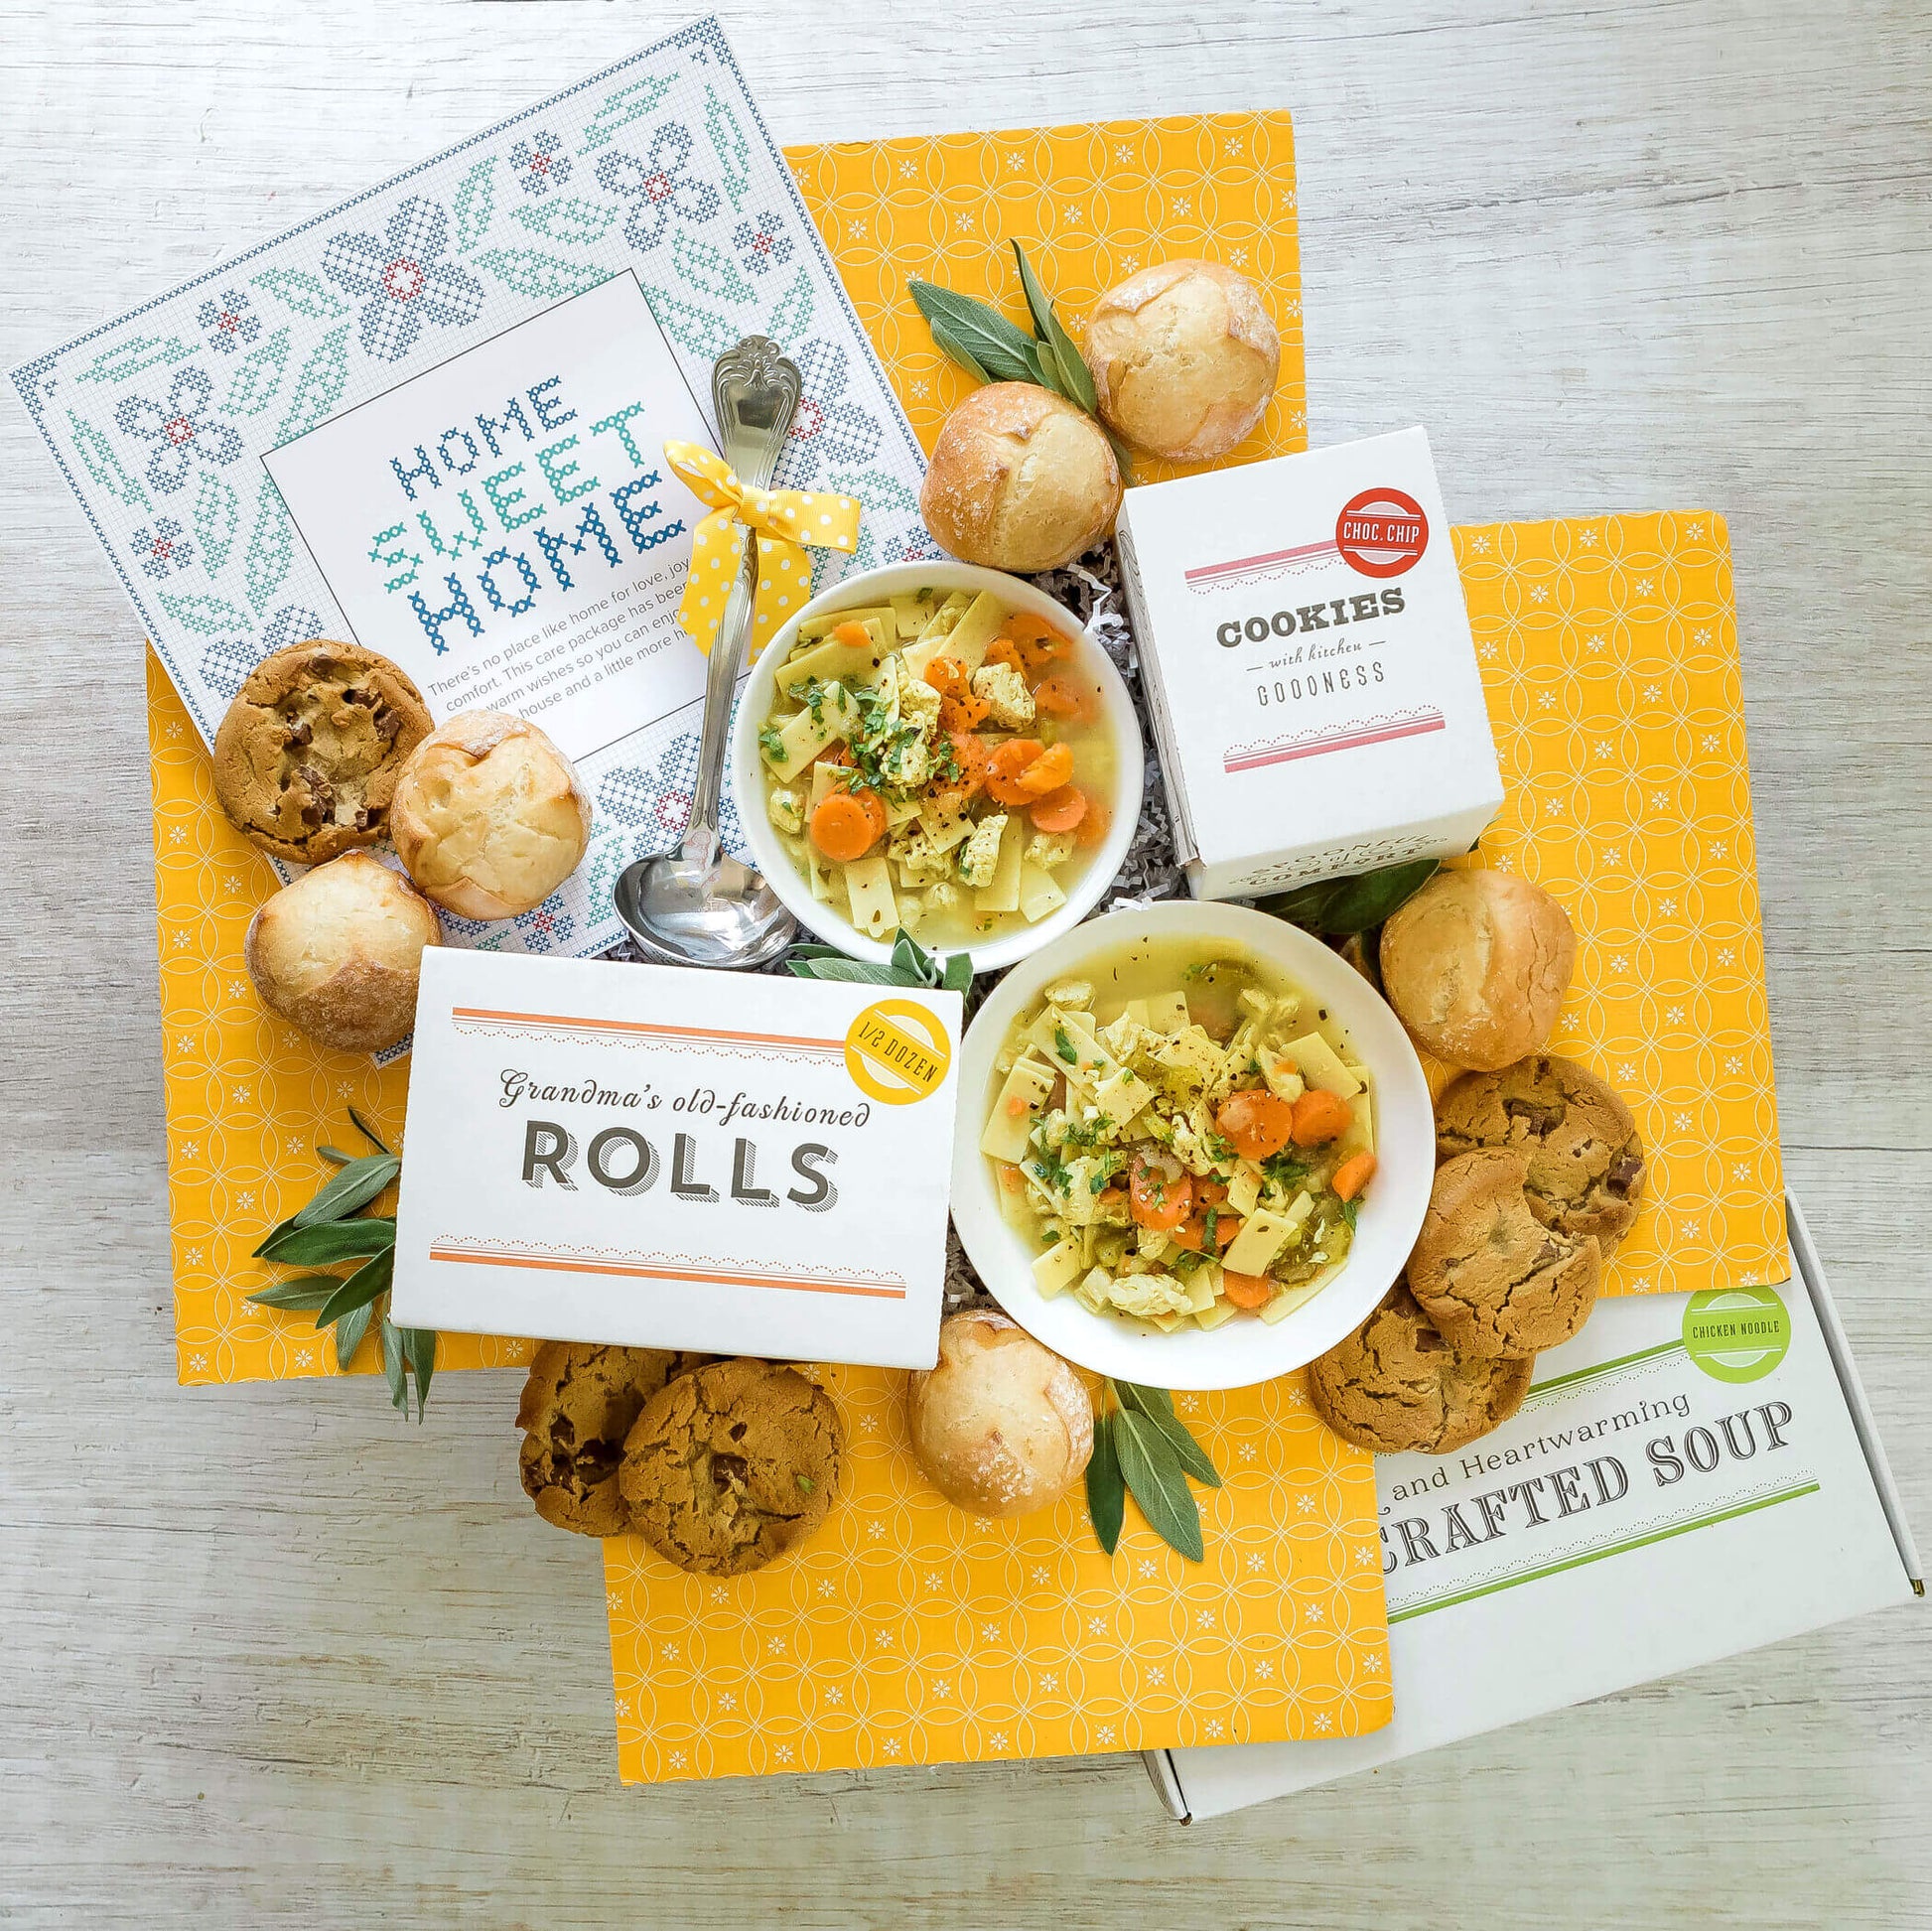 Housewarming Package: Two bowls of chicken noodle soup surrounded by rolls and cookies. Ladle and insert in image Insert reads: Home Sweet Home